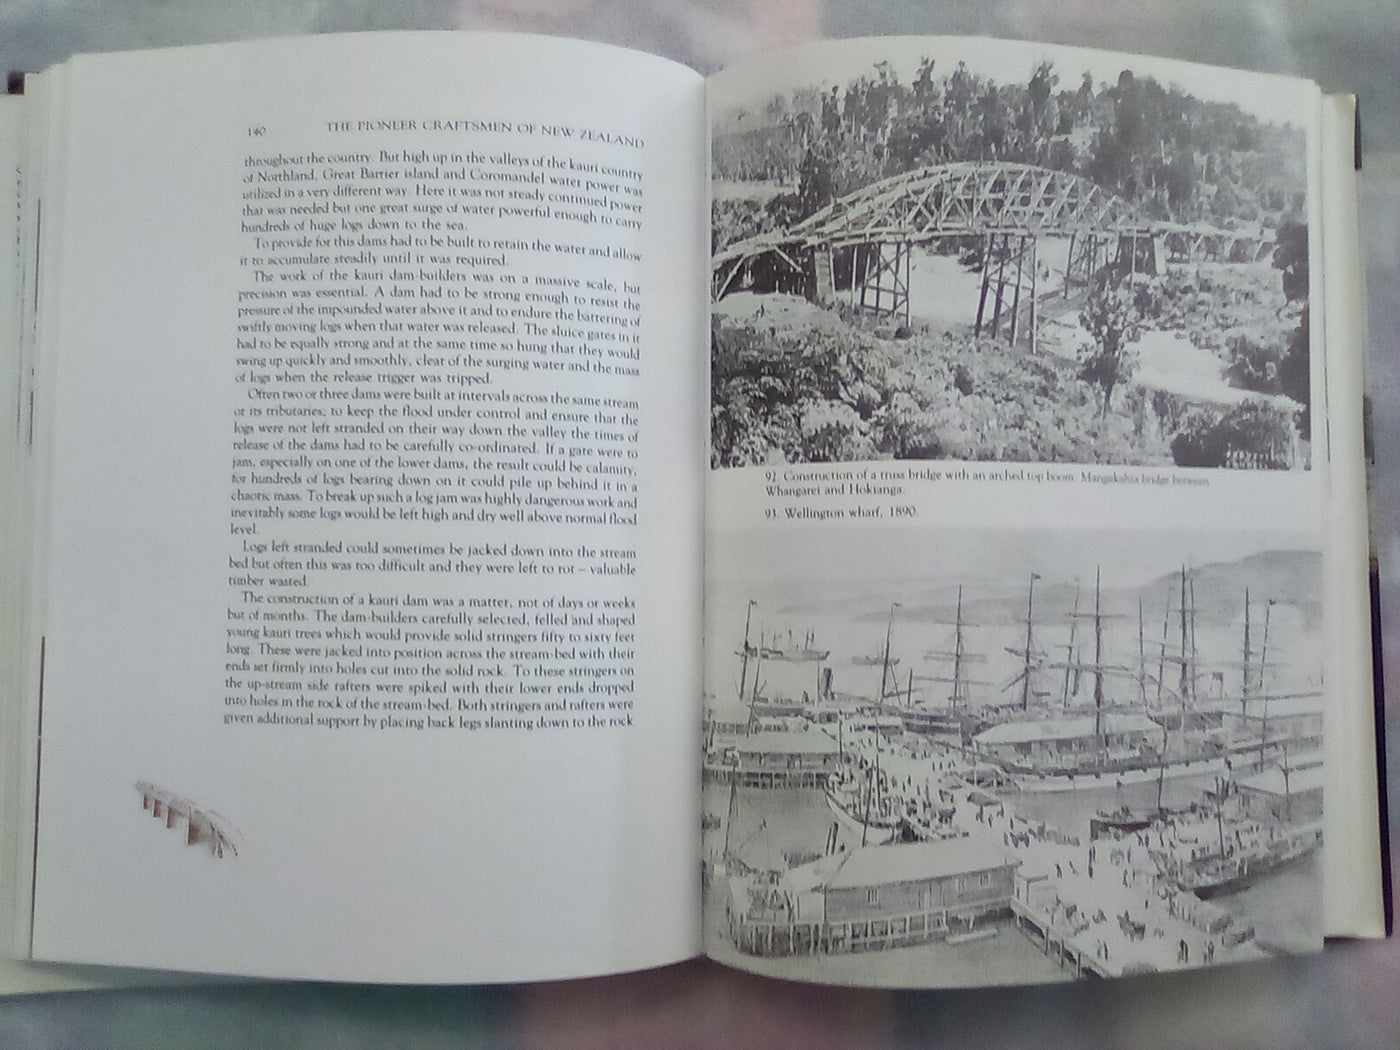 Pioneer Craftsmen of New Zealand by G.L. Pearce